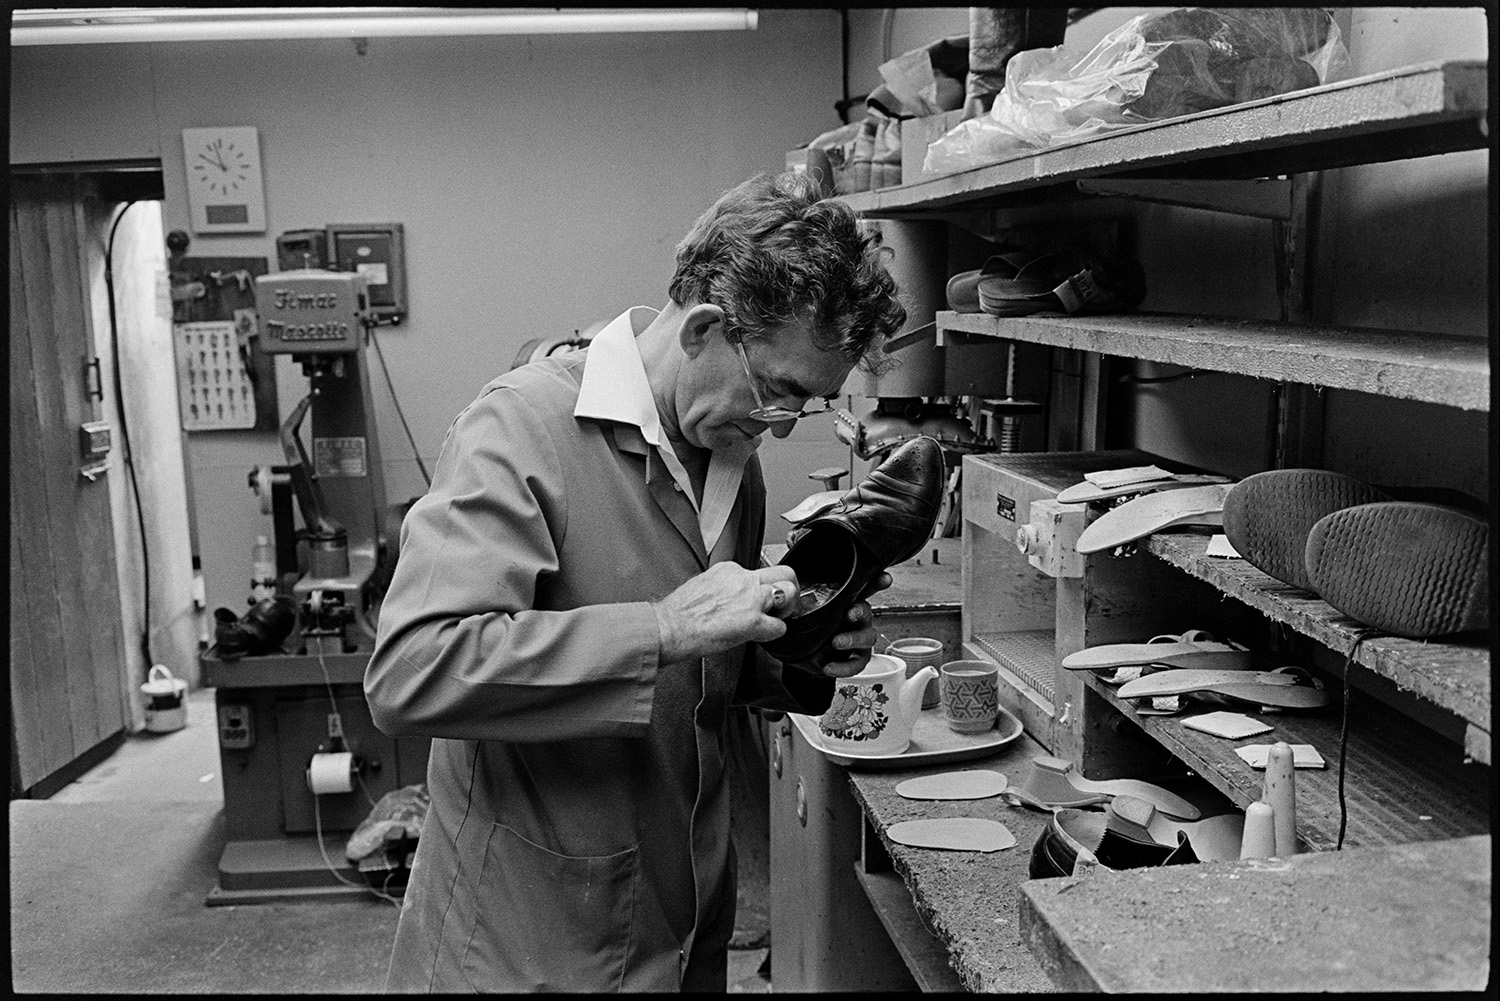 Cobbler mending shoes, interior of workshop, shoe displays. Customers collecting repairs. 
[A man mending a shoe in his cobbler's workshop in Mill Street, Bideford. Shoes can be seen on the shelves in front of him, as well as a tray with a teapot and mugs. A large machine is in the background.]